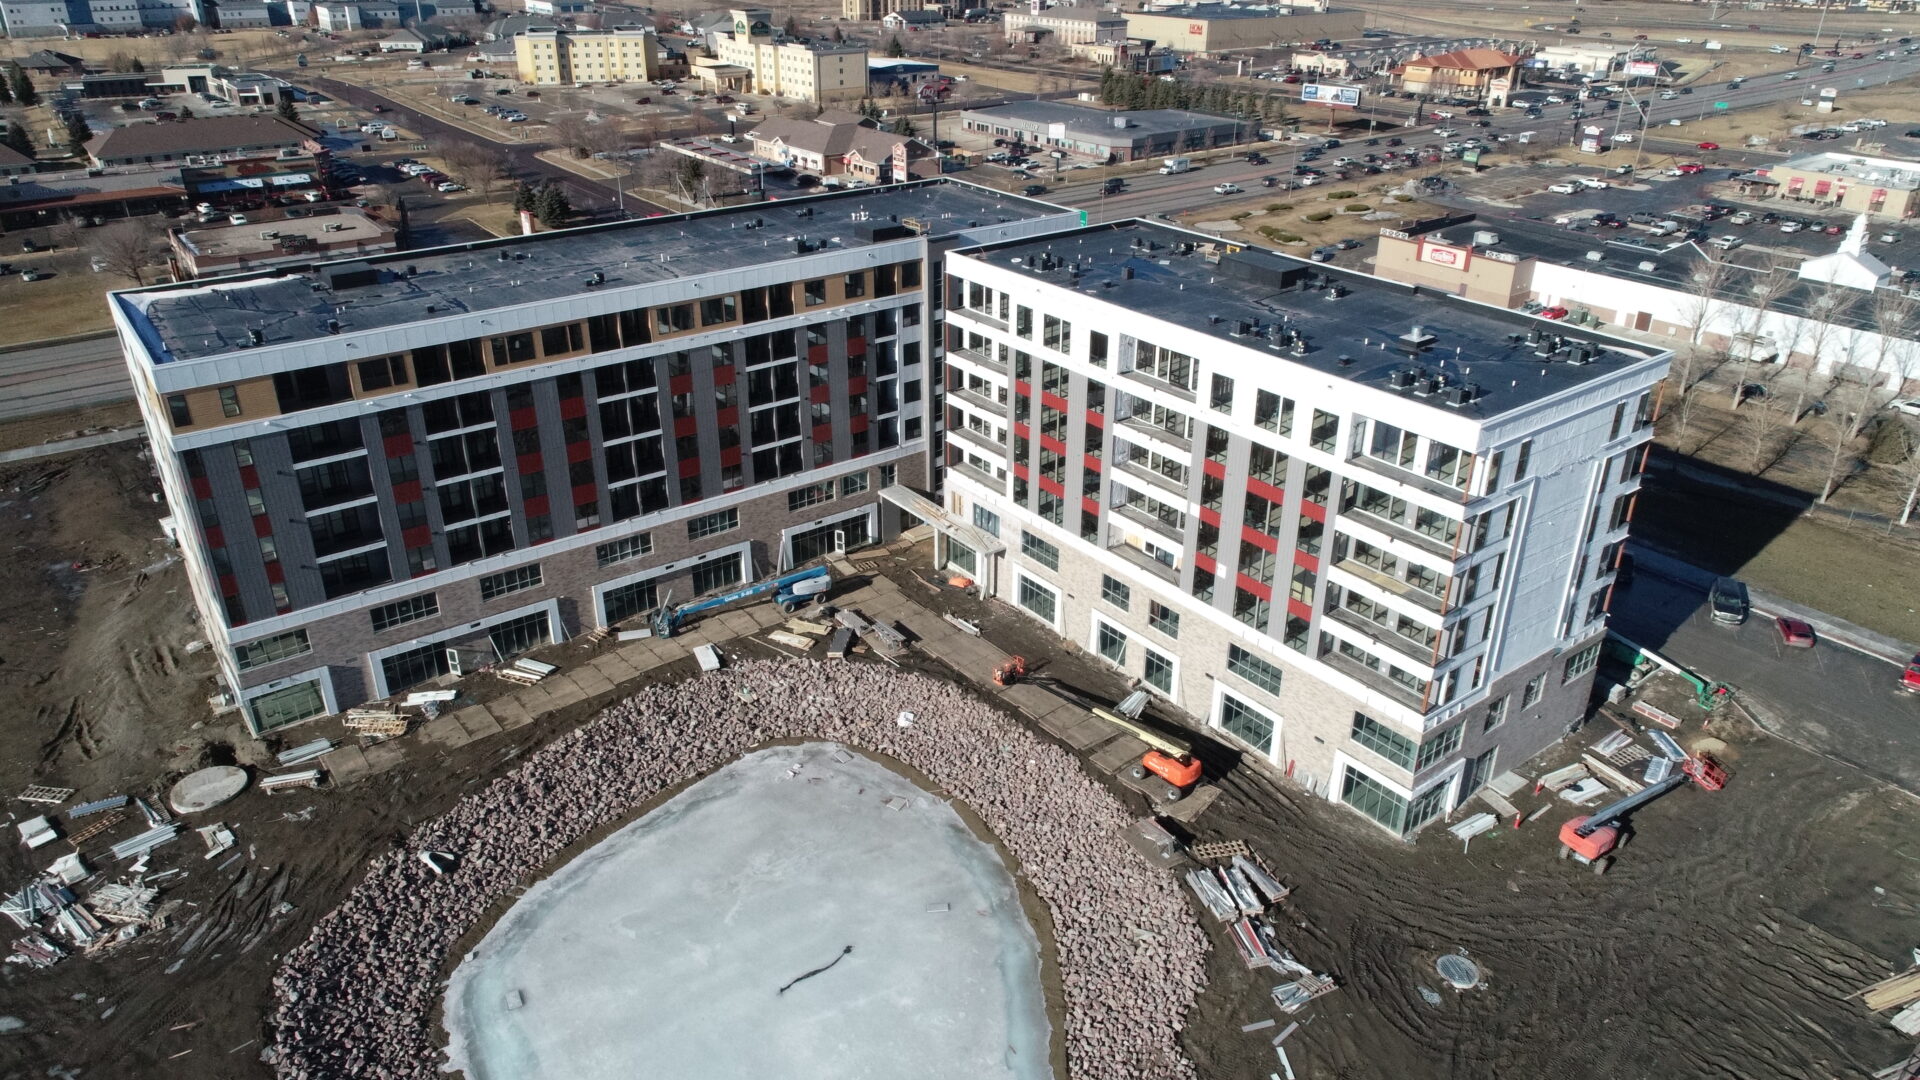 MAKT at EOLA in Fargo drone picture